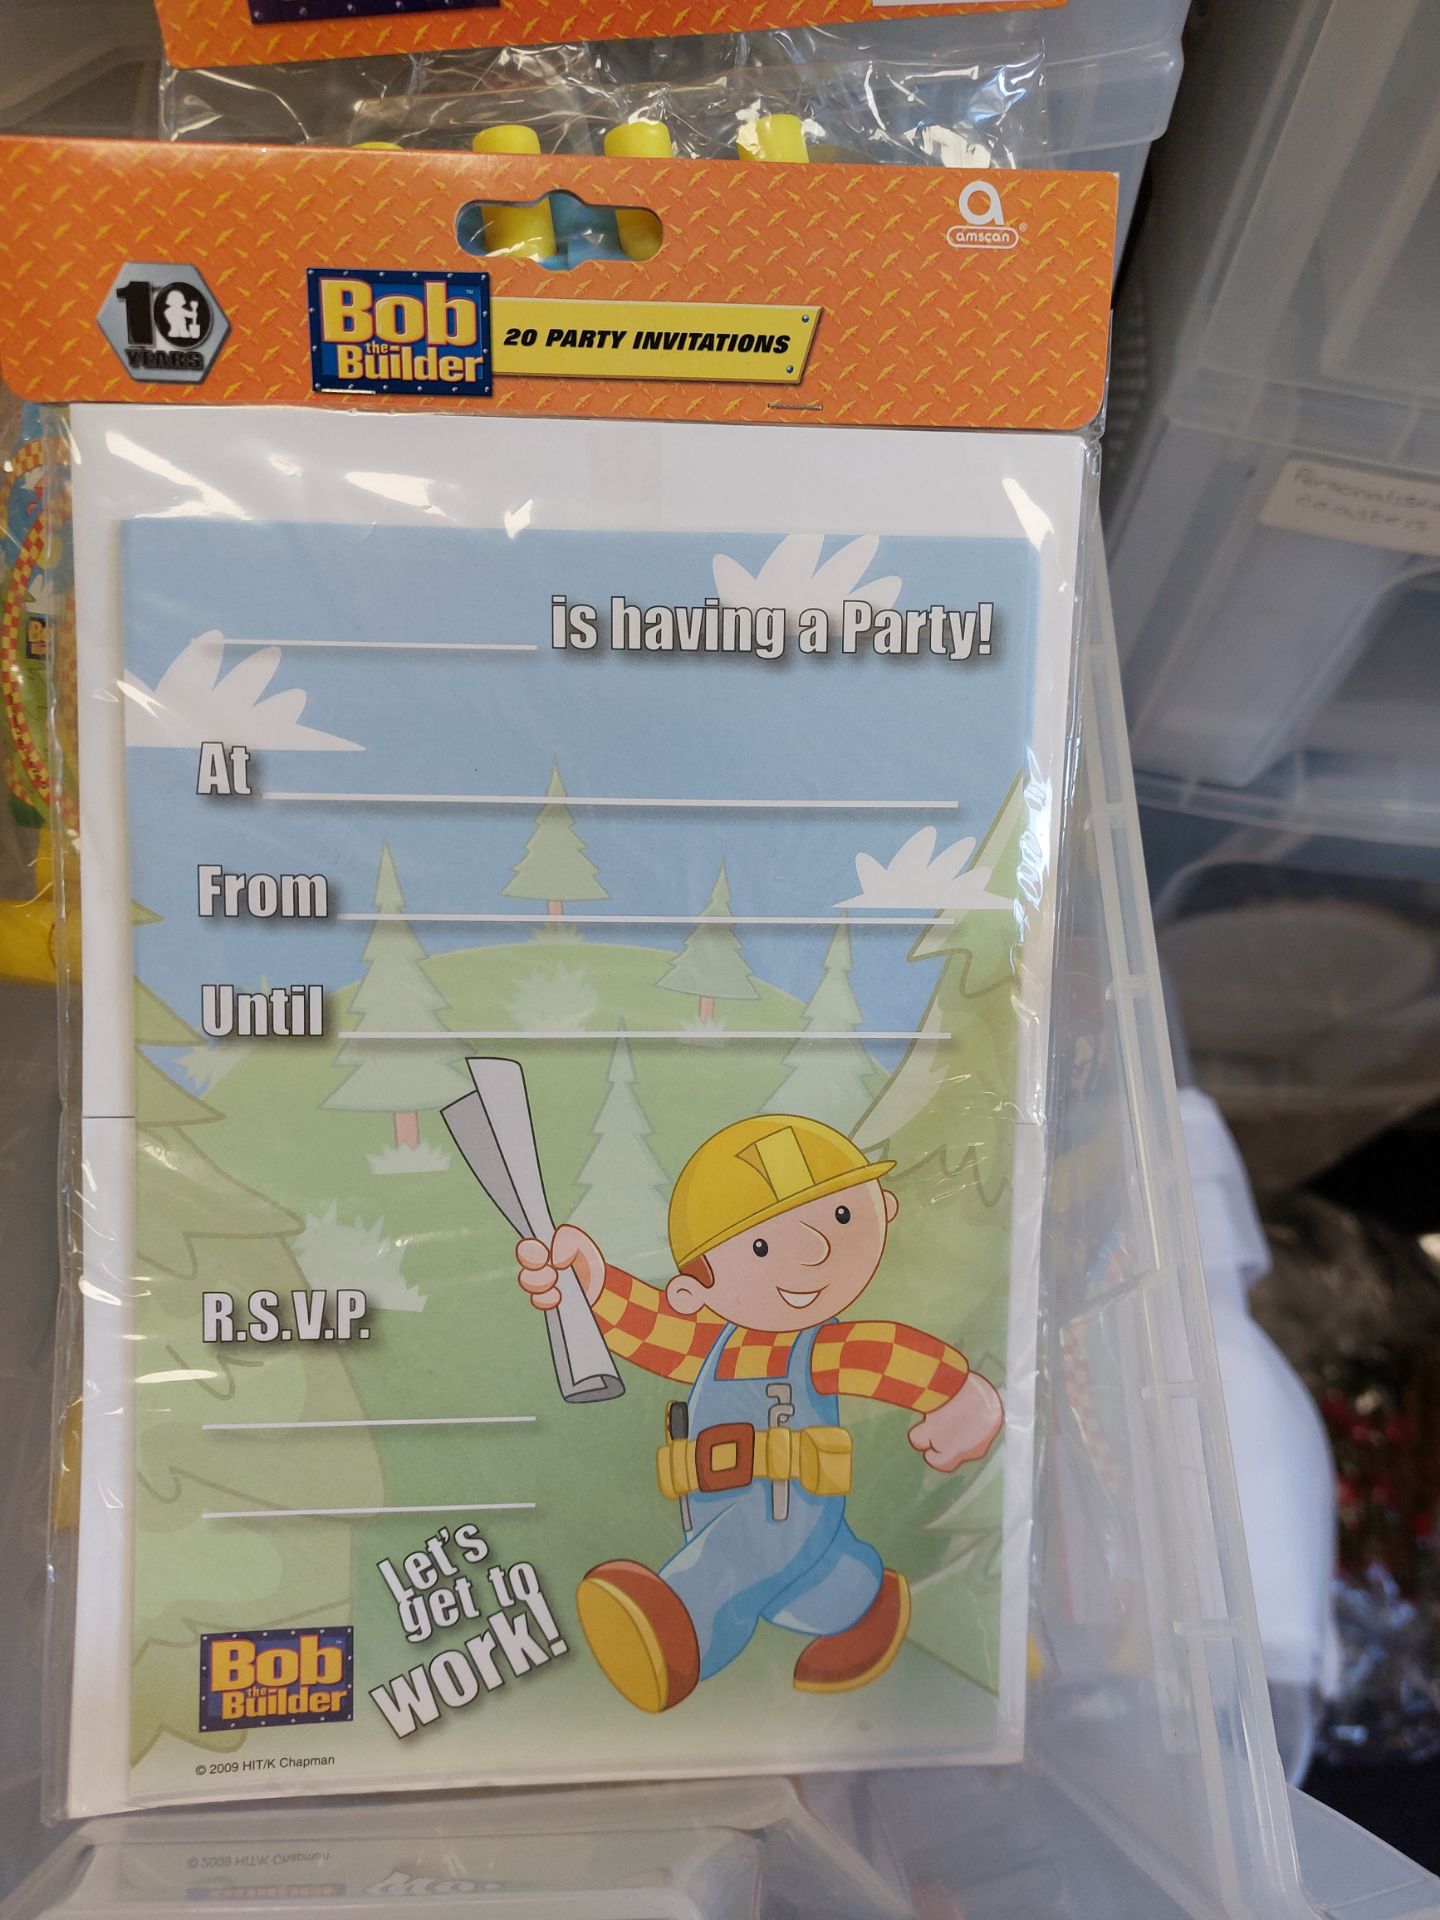 Bob The Builder Party Items - Image 5 of 5